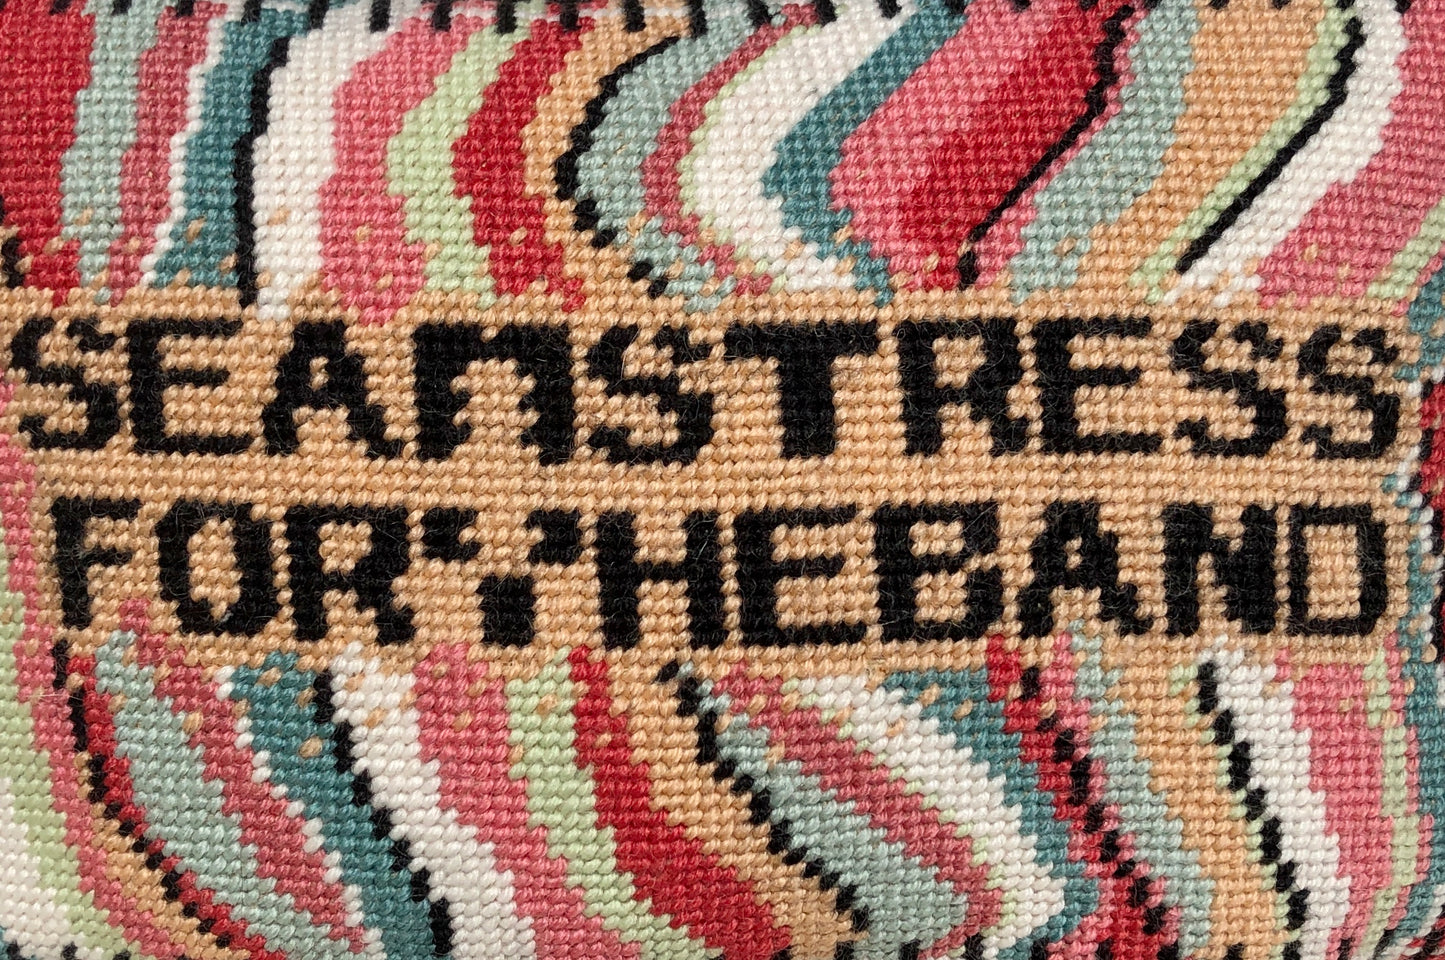 SEAMSTRESS FOR THE BAND stitched in black inside tan box, surrounded by wavy bands of turquoise, pink, red, white, lime and a keyboard border